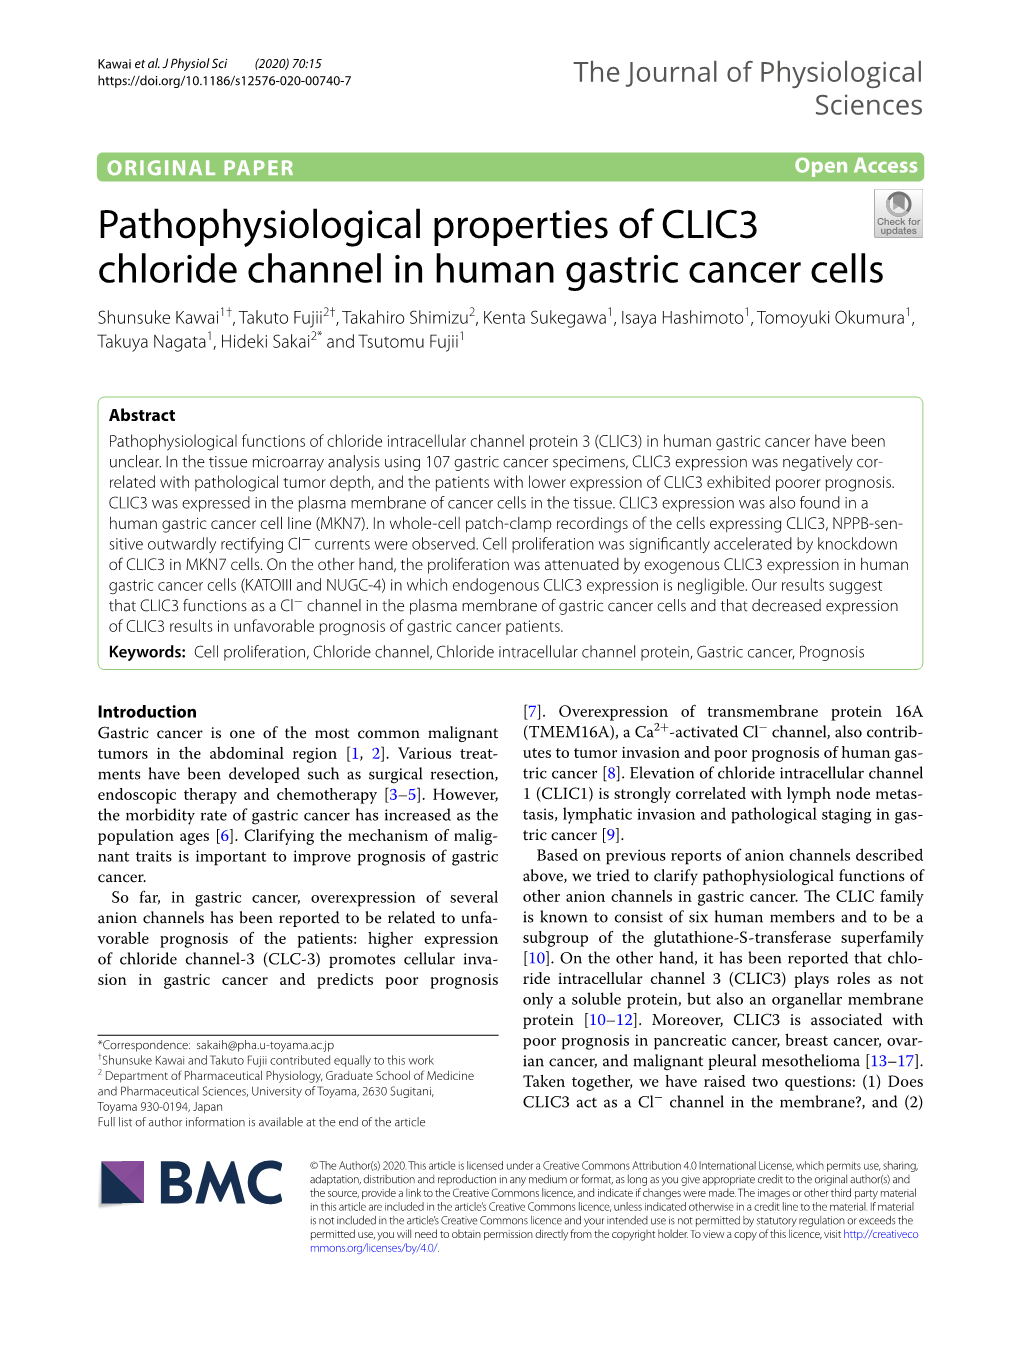 Pathophysiological Properties of CLIC3 Chloride Channel in Human